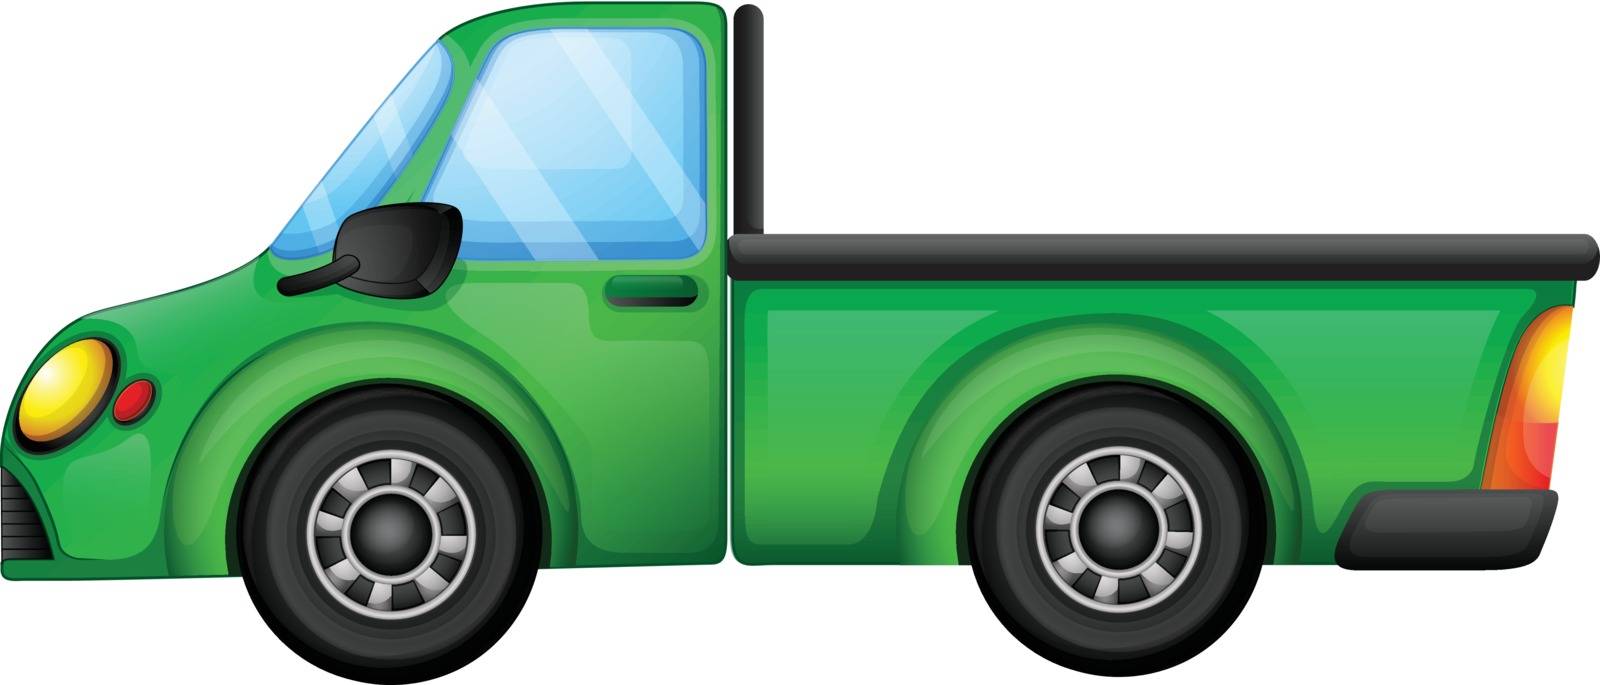 Illustration of a green truck on a white background